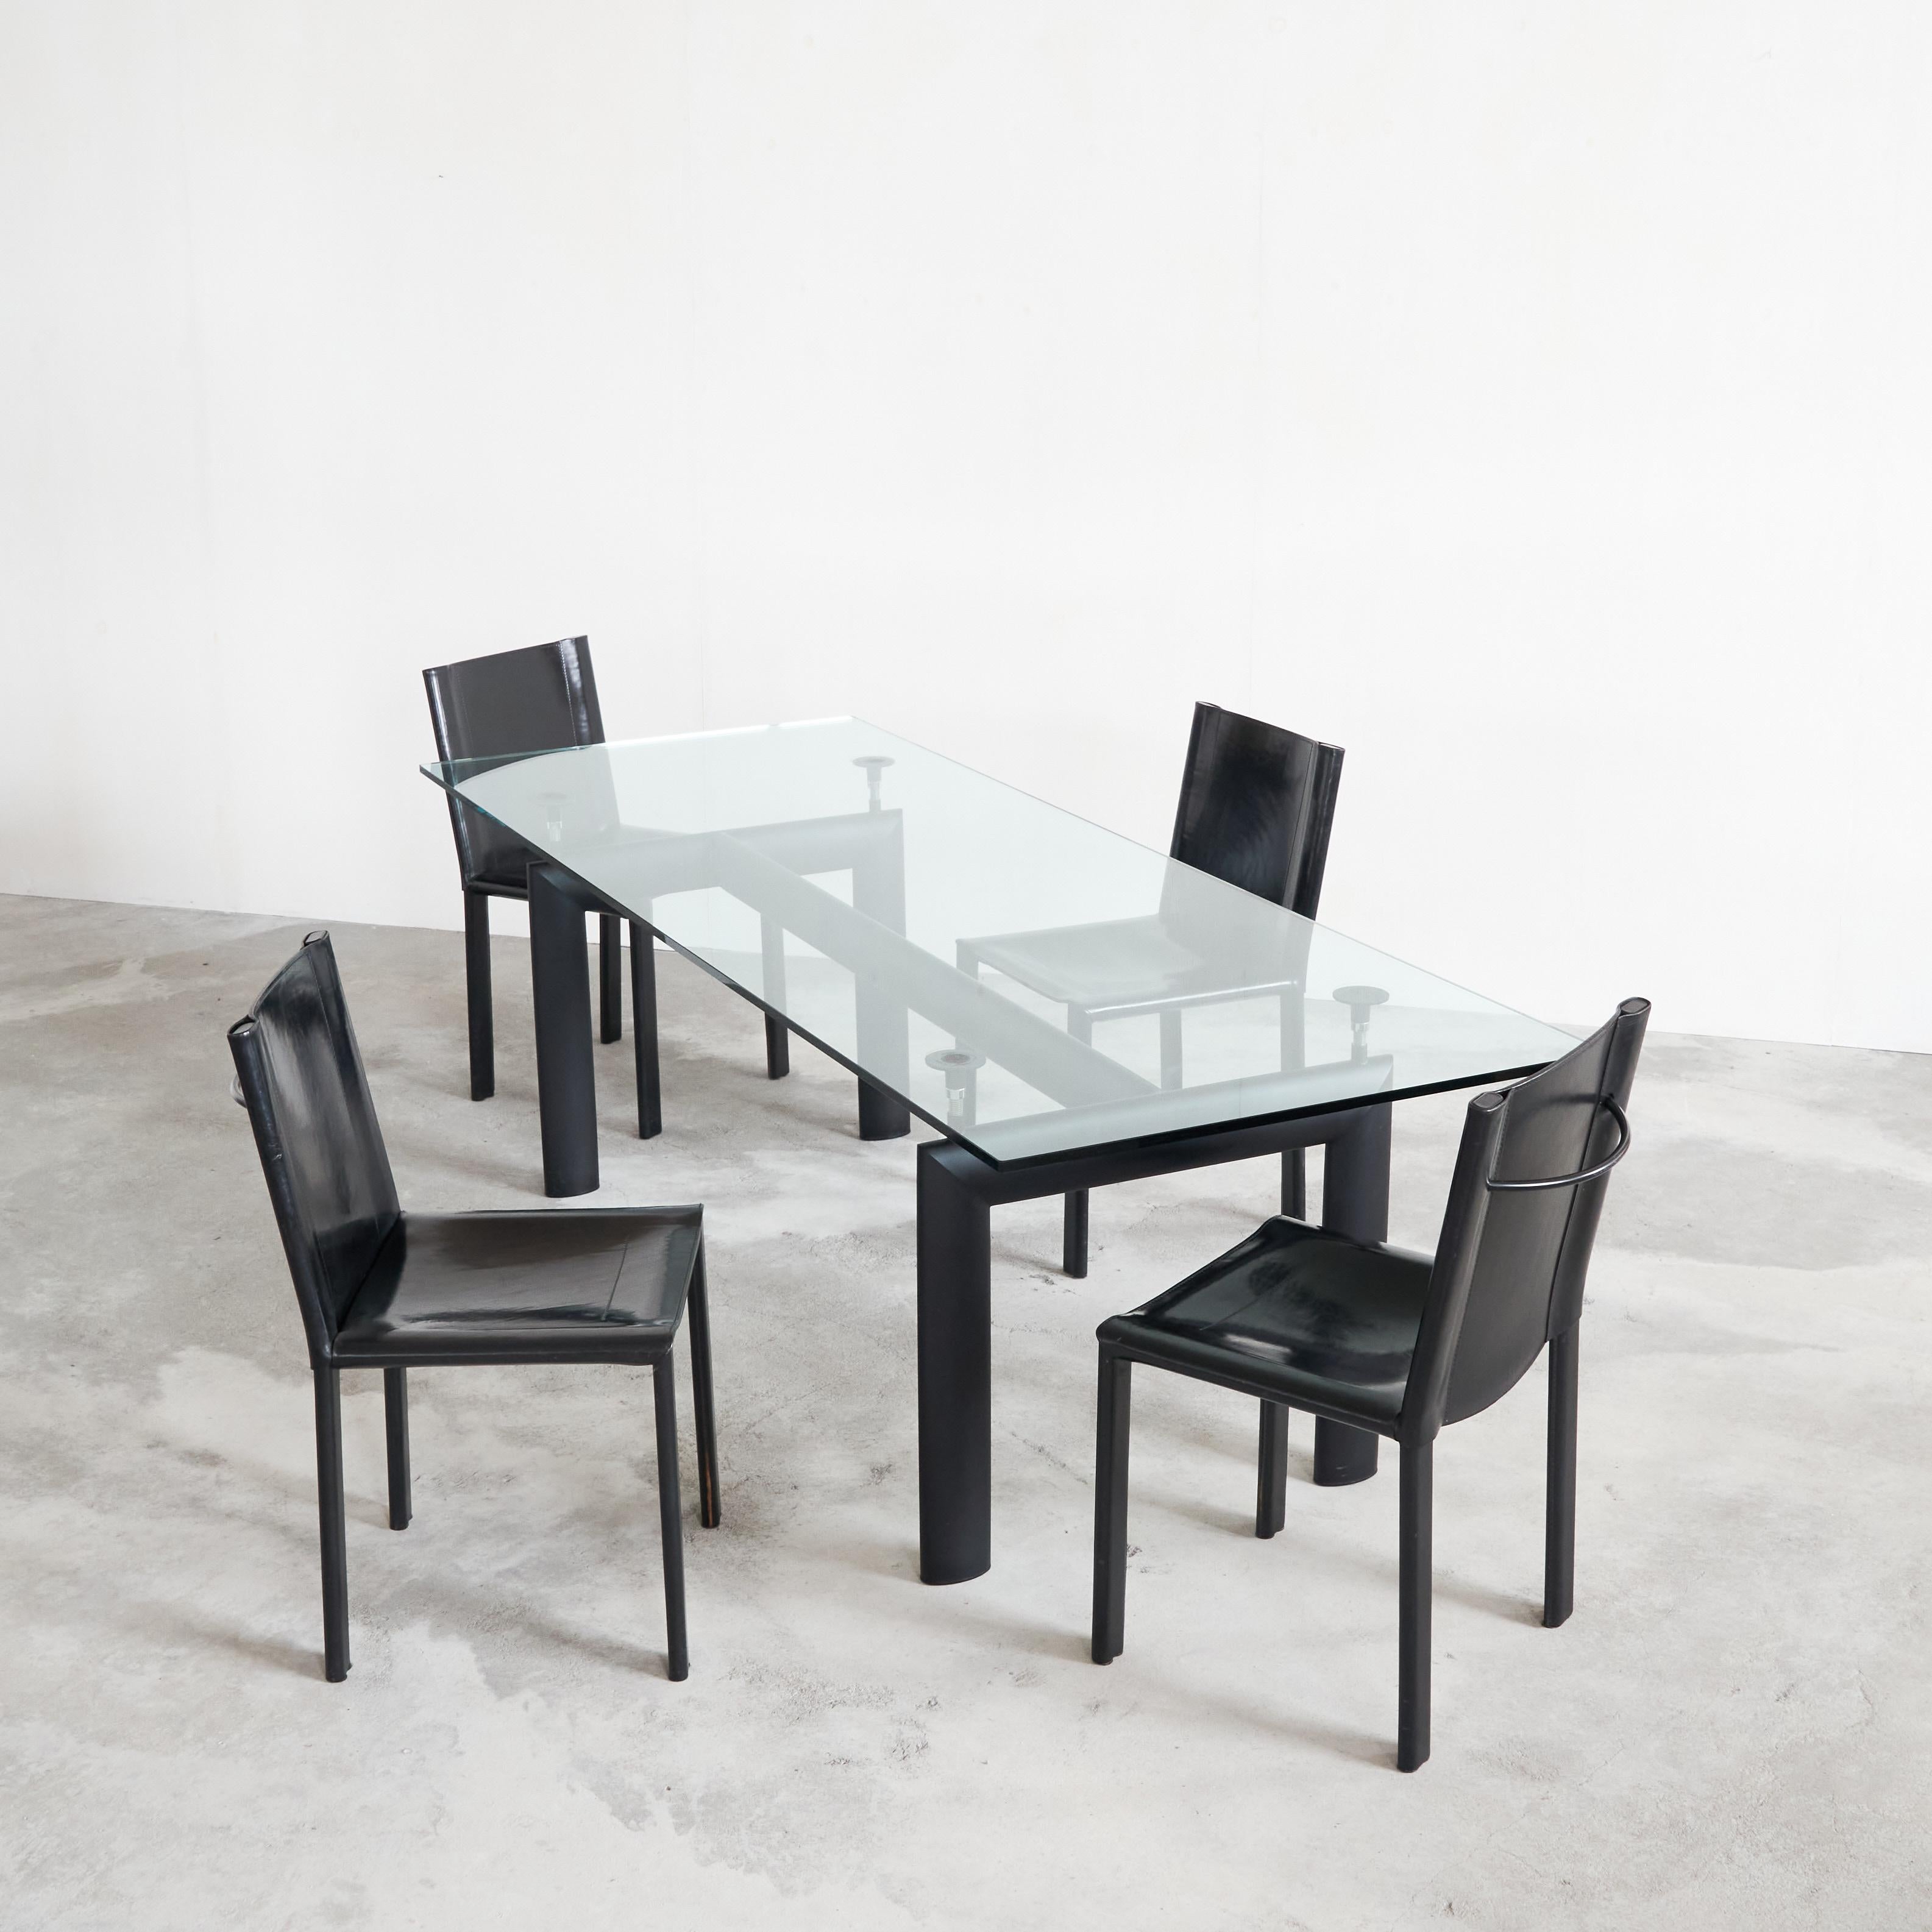 Le Corbusier, Perriand and Jeanneret LC6 'Table Tube D’avion', Cassina edition, Italy, 1990s & Set of 4 Black Leather Chairs by Matteo Grassi, Italy, 1990s.

The table:

The core concept for the Table tube d’avion table, introduced in 1929 at the